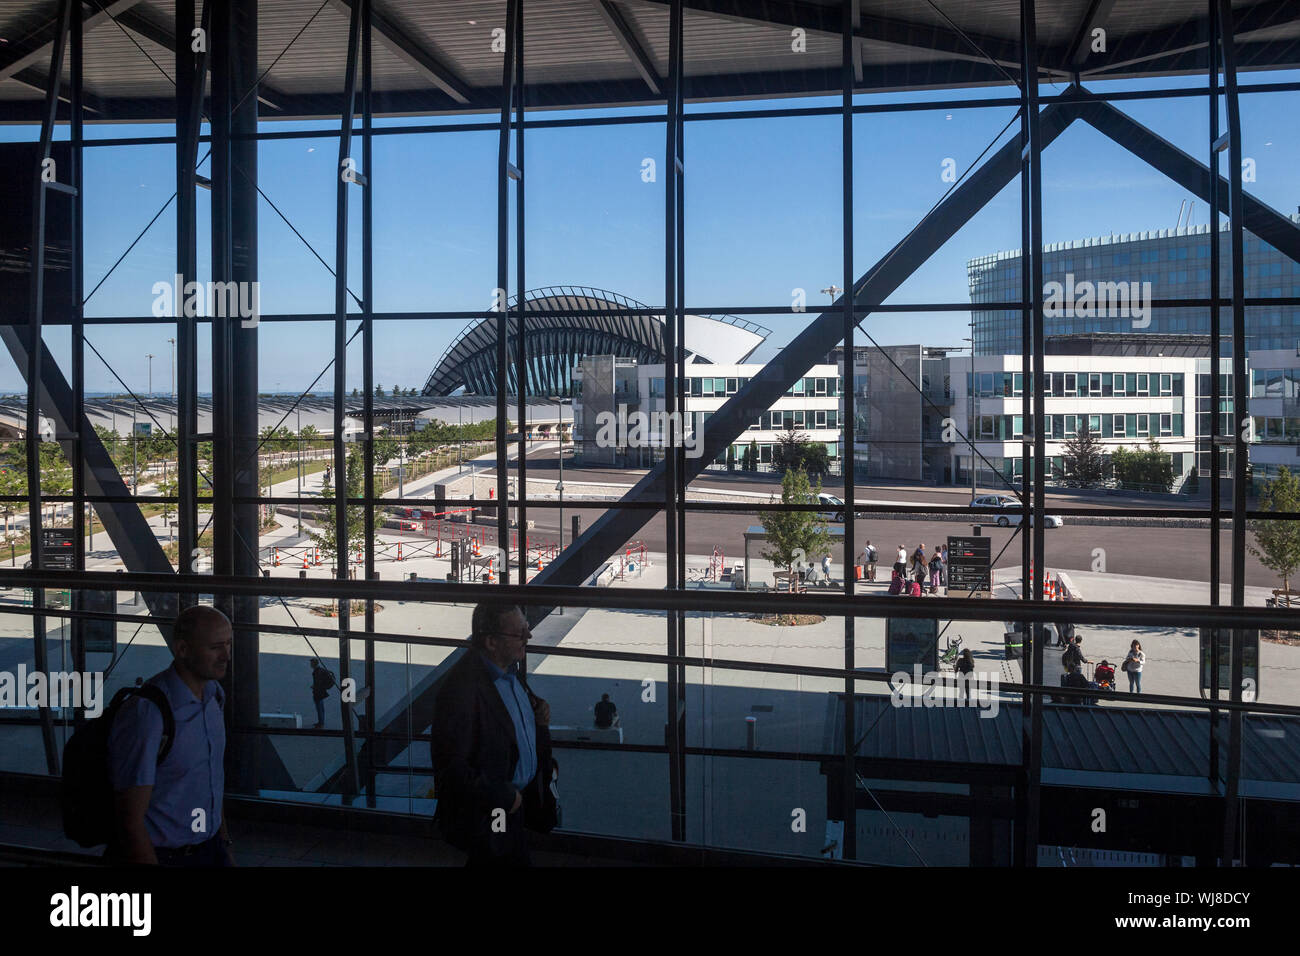 LYON, FRANCE - JULY 13, 2019: Passengers passing by the terminal 1 of Aeroport de Lyon Airport, Saint Exupery, while the iconic train station of the a Stock Photo